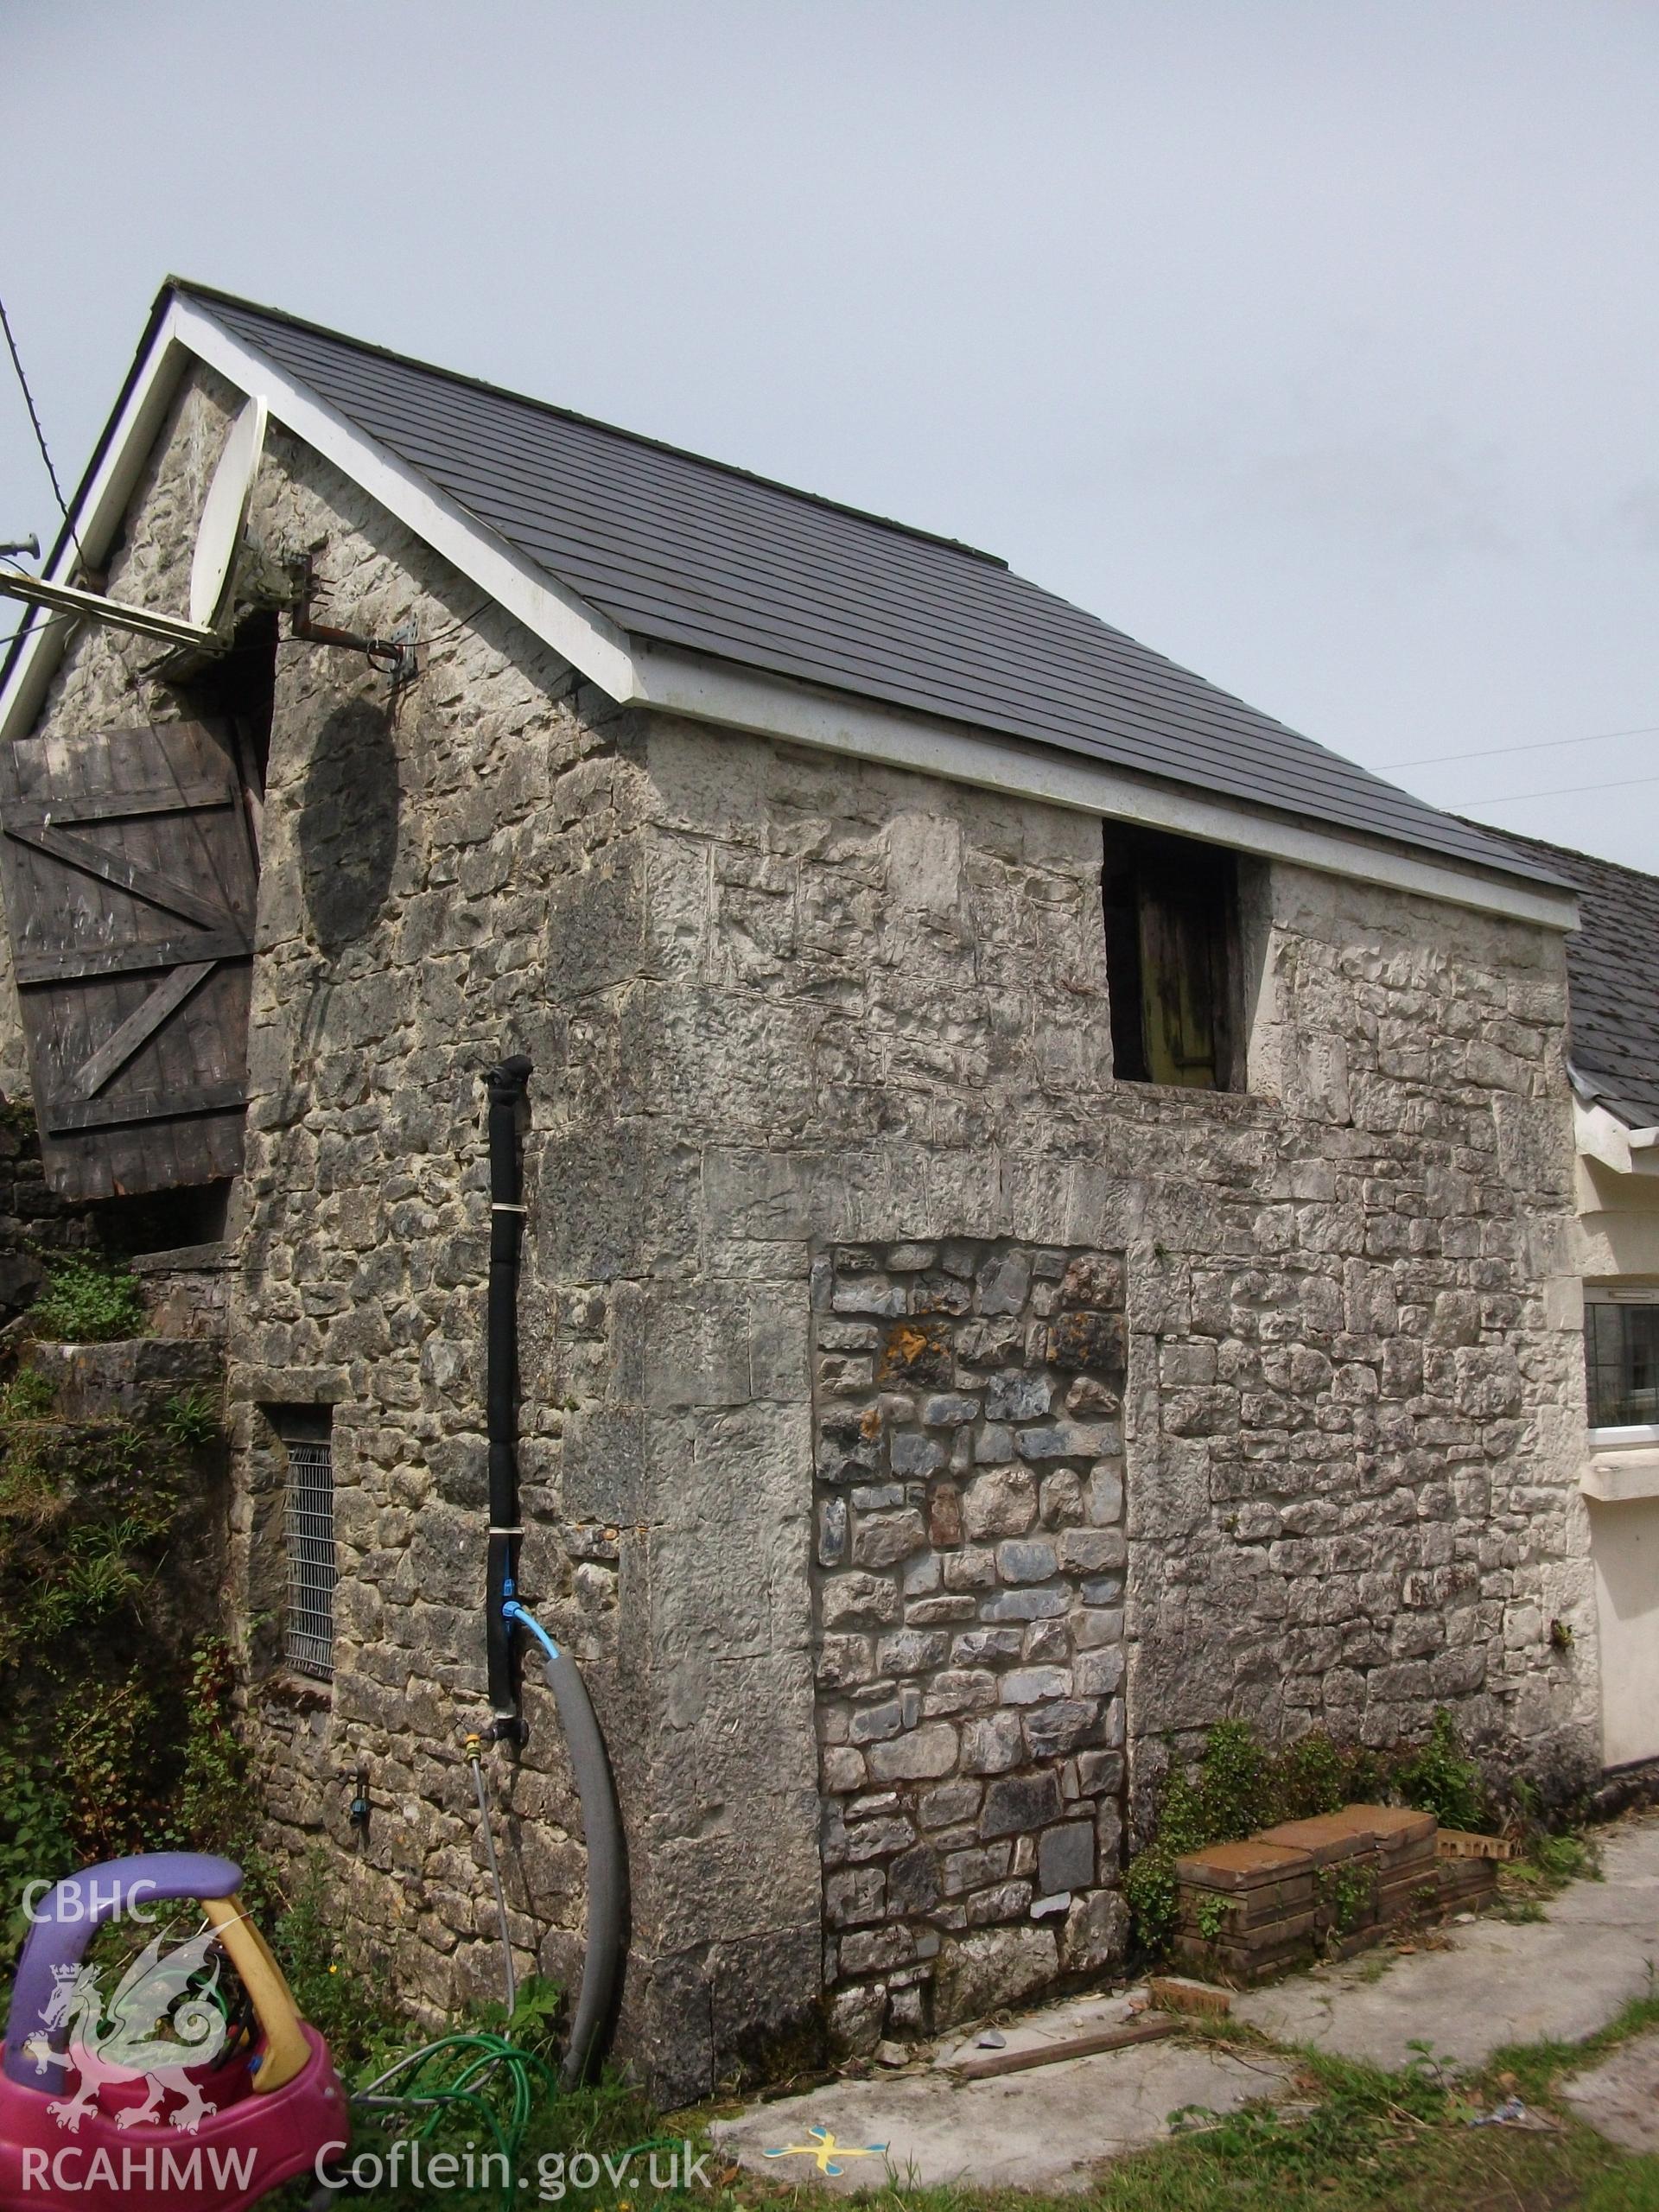 Photograph showing exterior rear elevation of the building attached to the cottage at Pant-y-Castell, Maesybont, Photographed by Mark Waghorn to meet a condition attached to planning application.